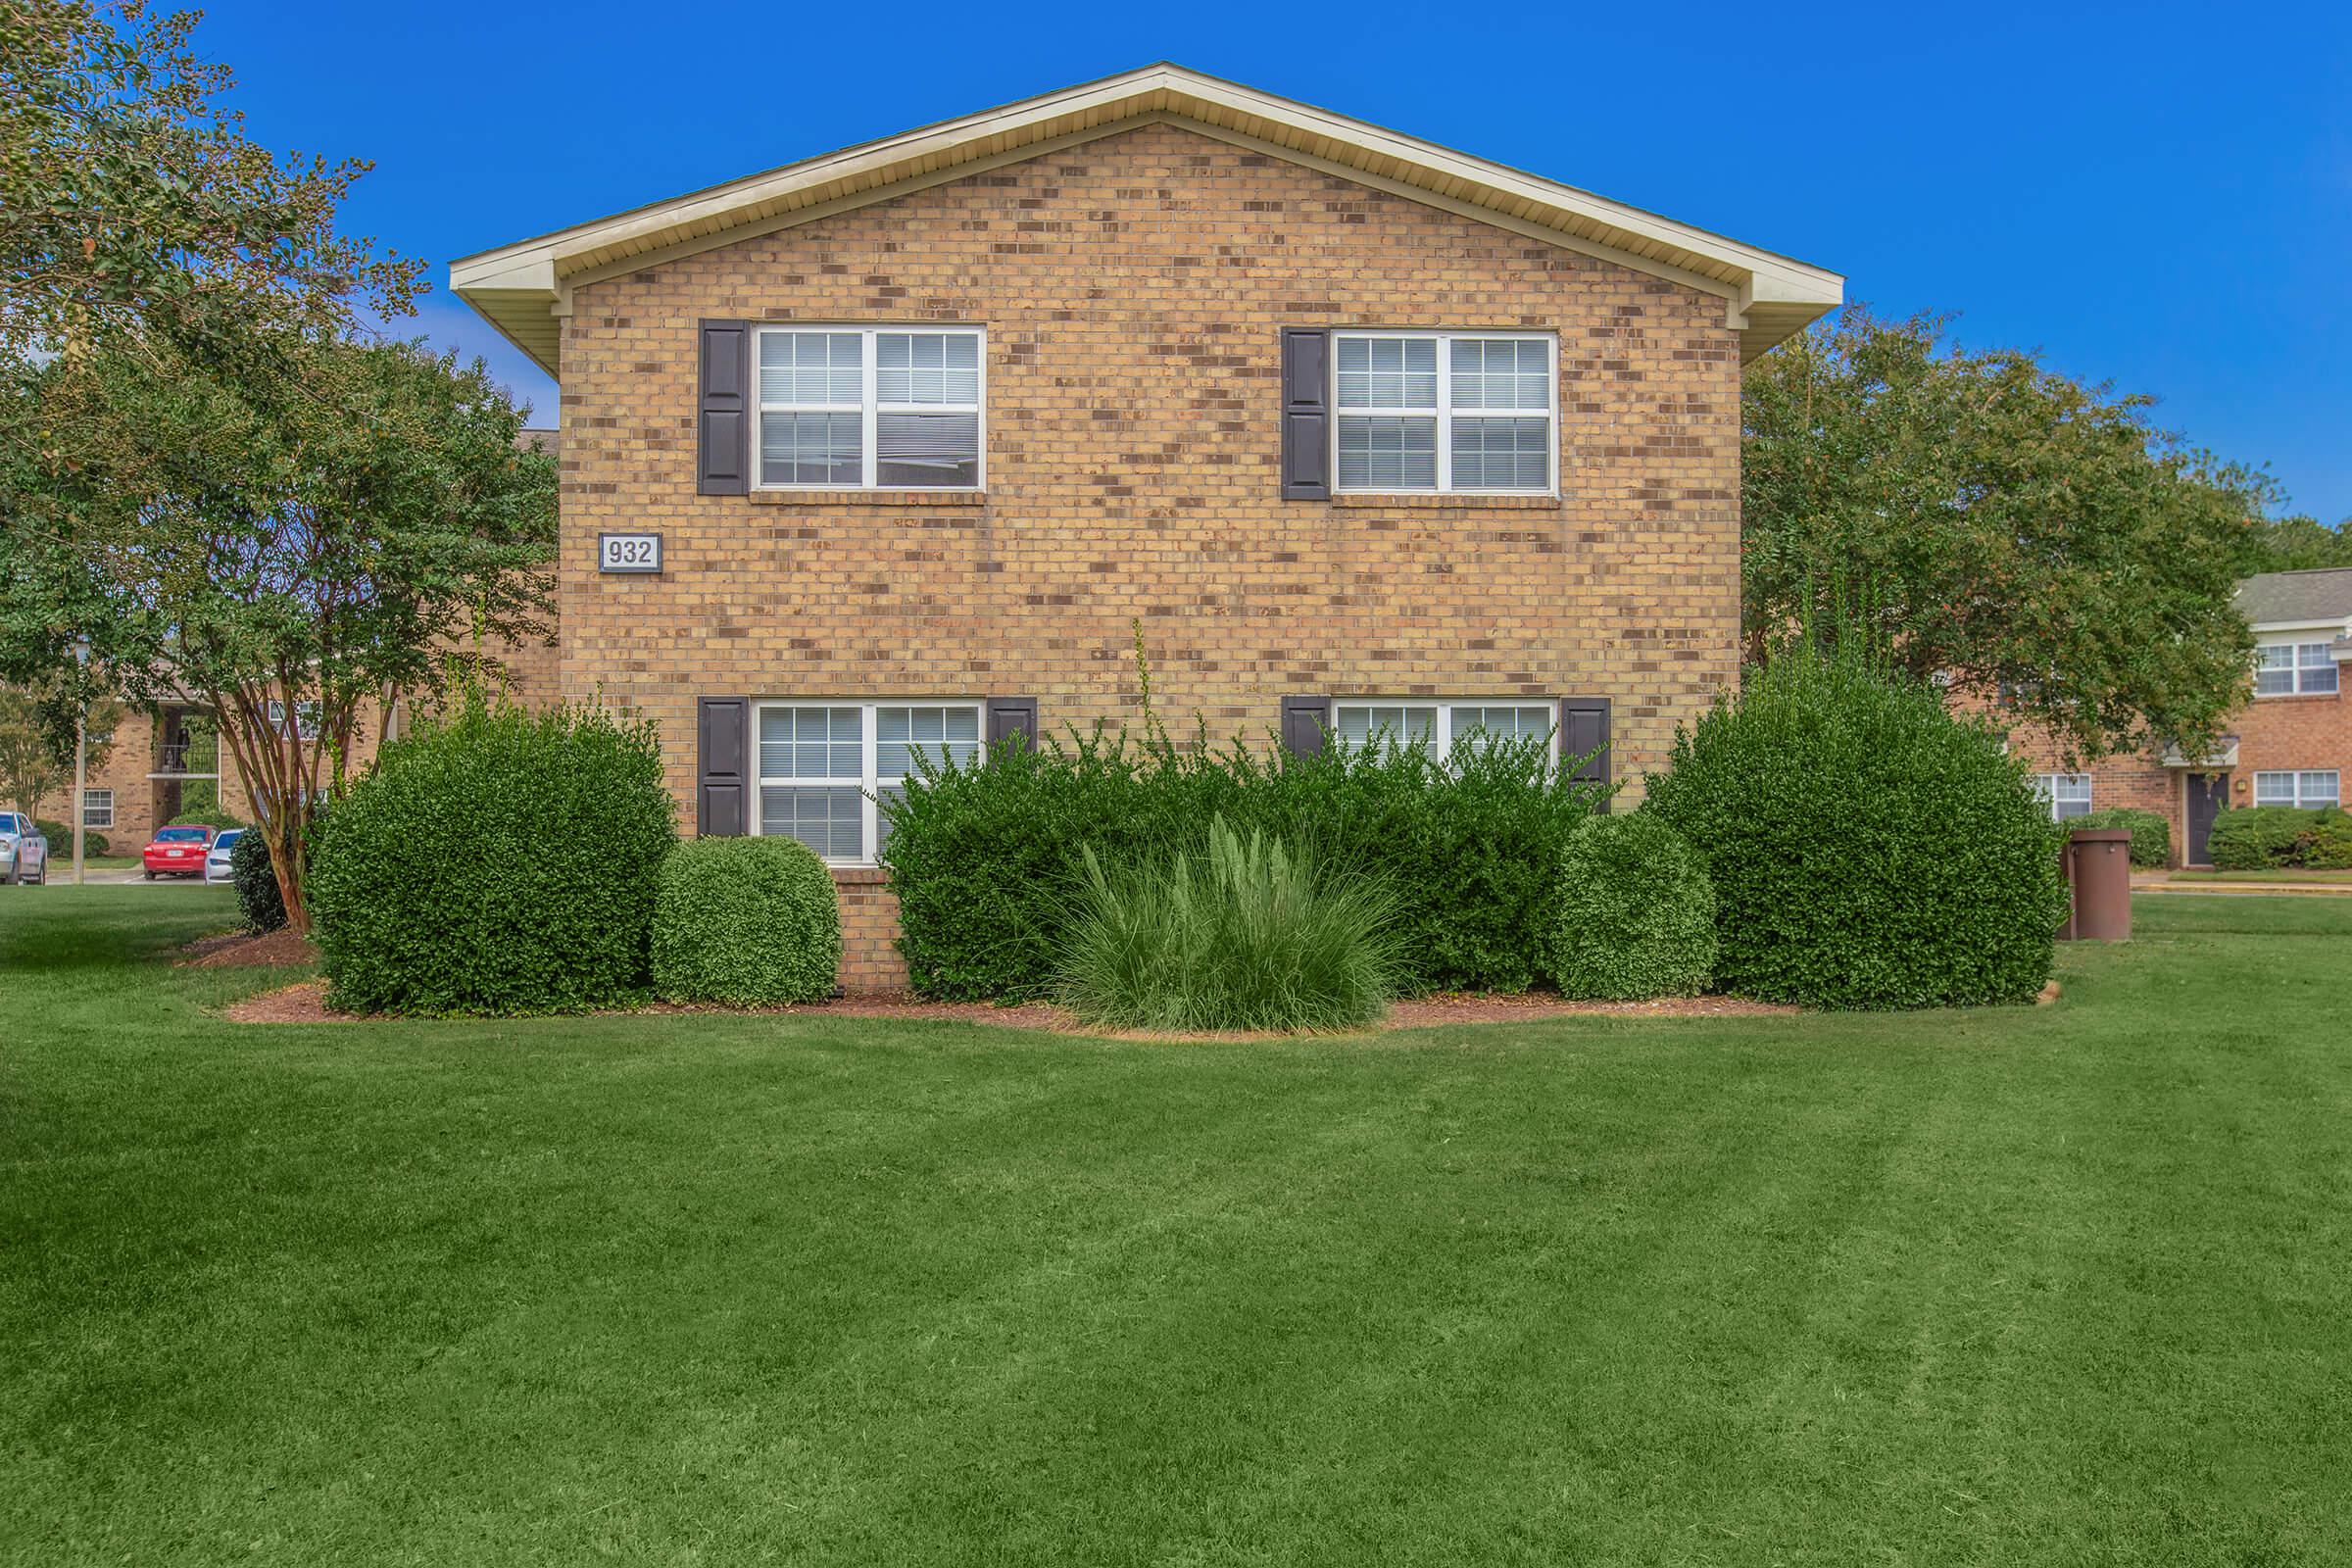 a large brick building with grass in front of a house